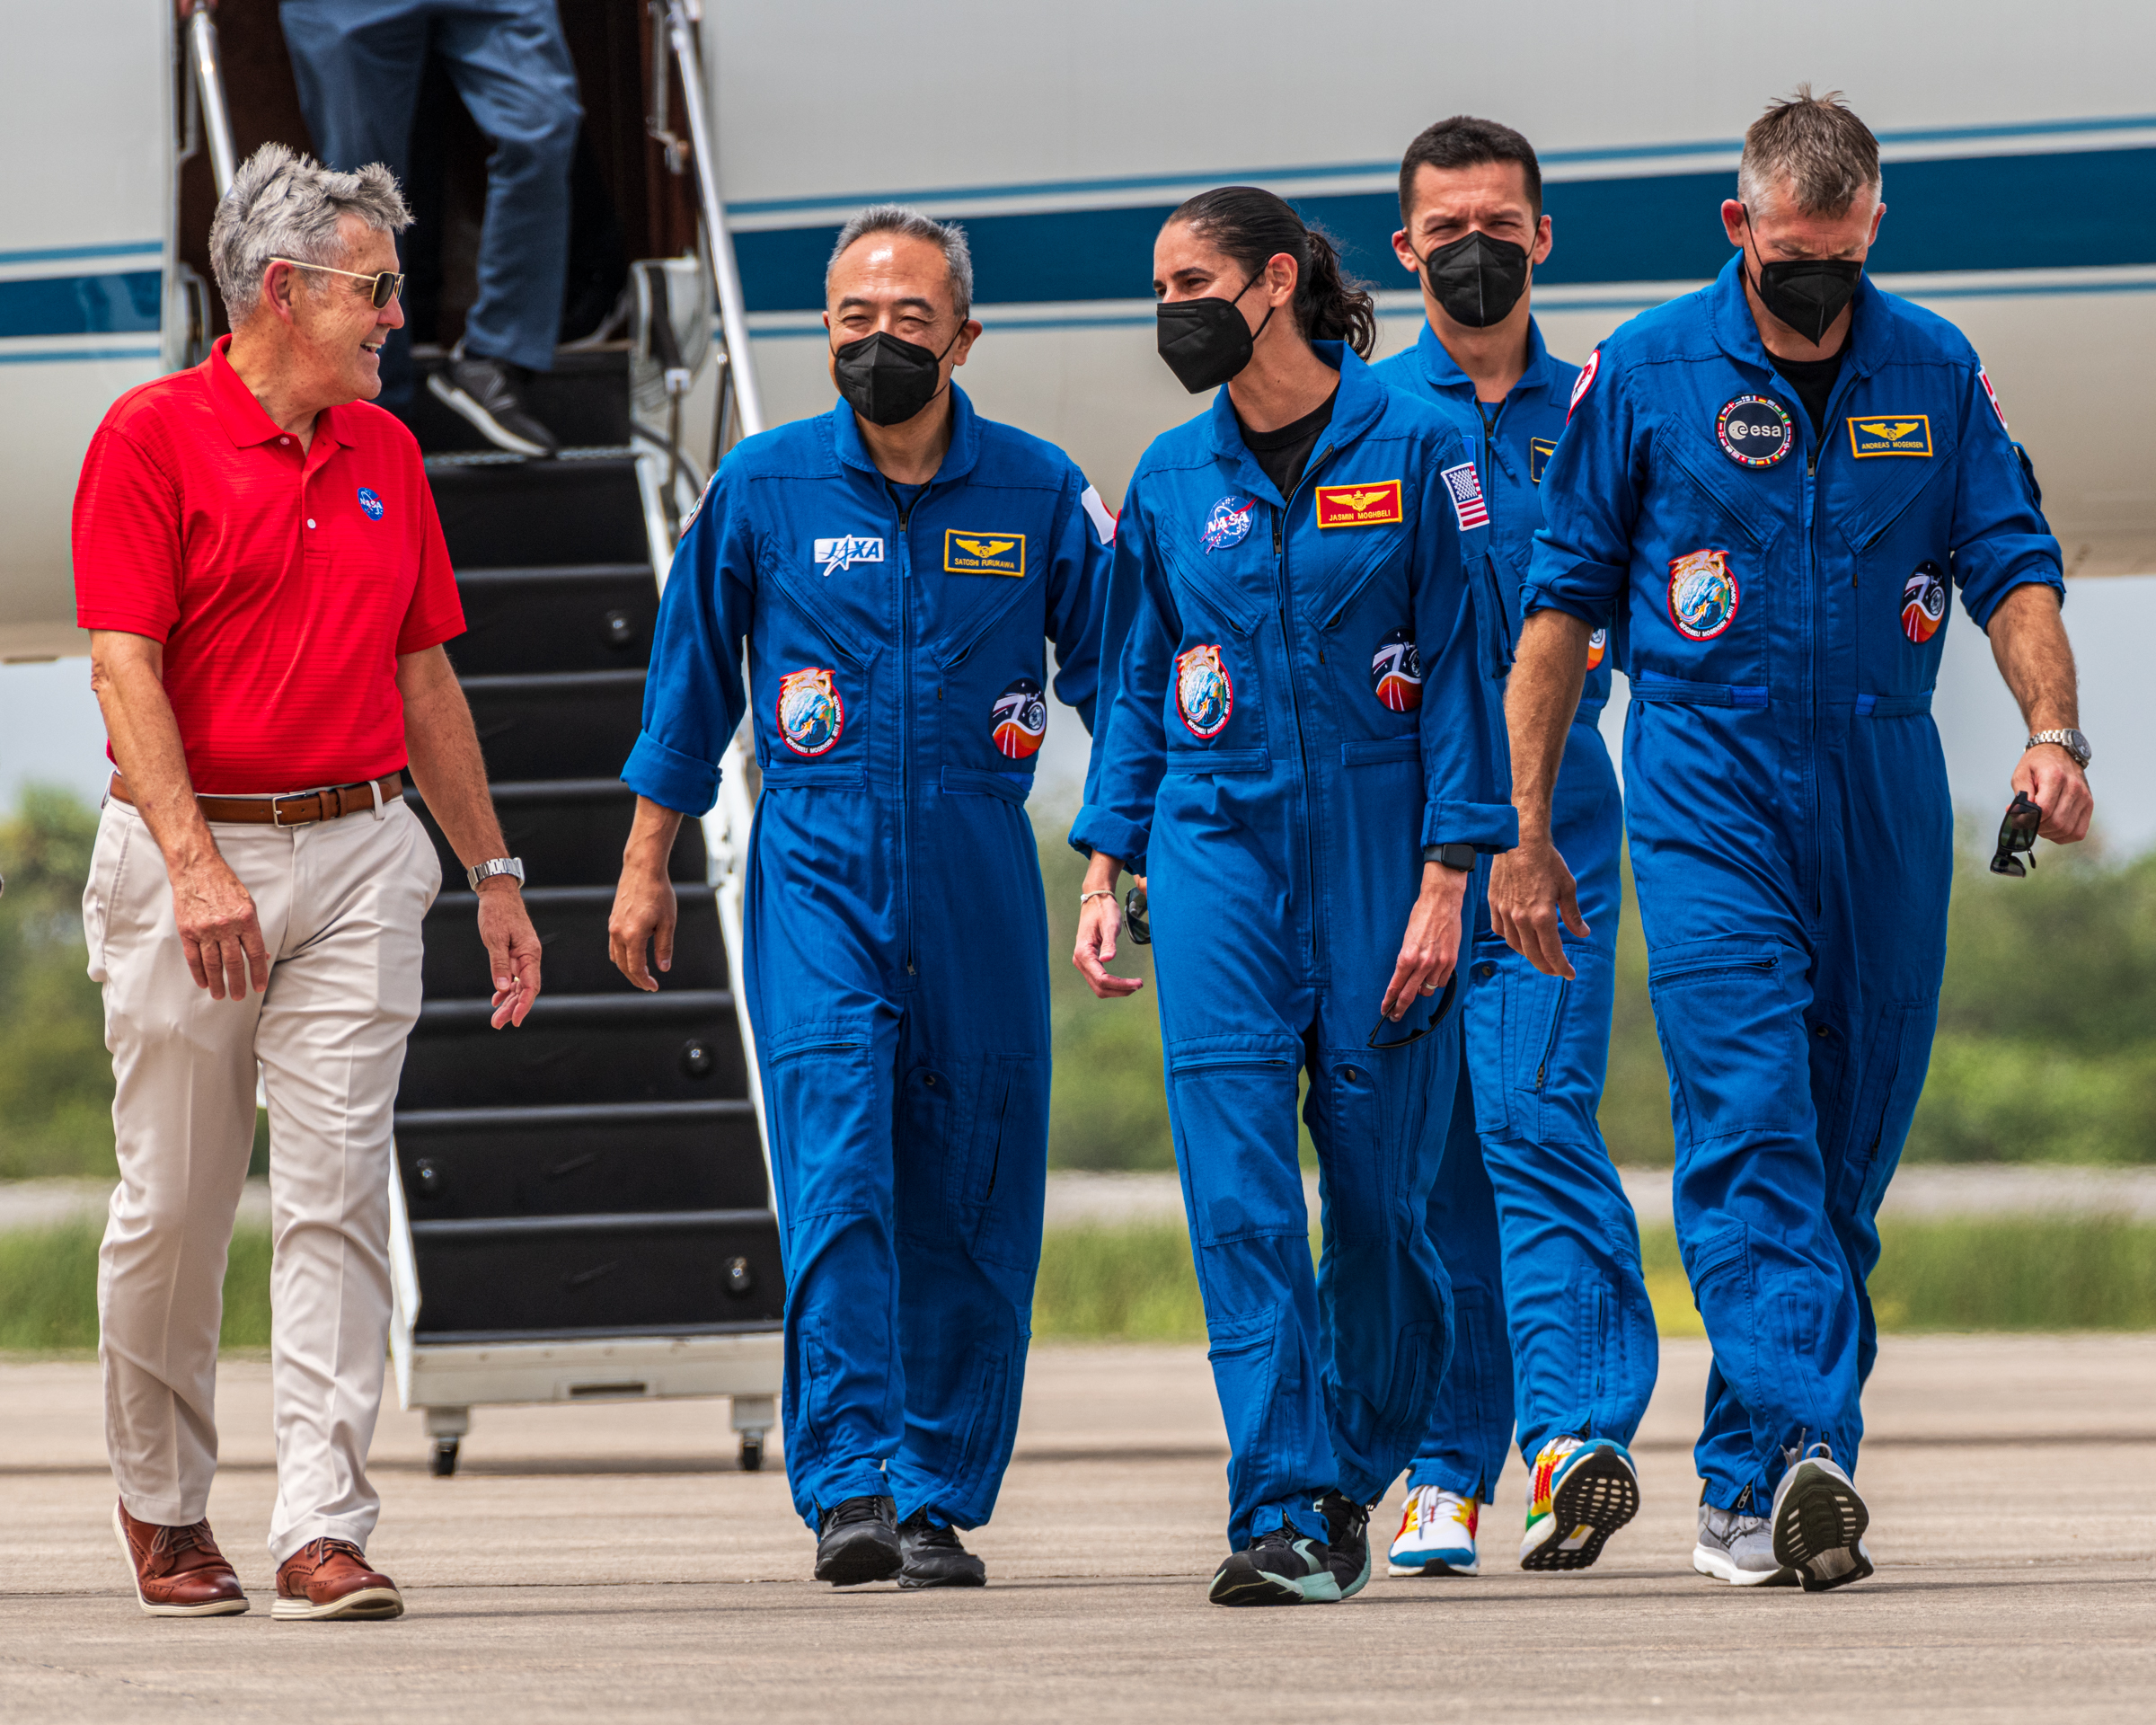 Bob Cabana, Associate Administrator NASA, and Crew-7 walking towards the press conference after the crew just arrived in Florida.